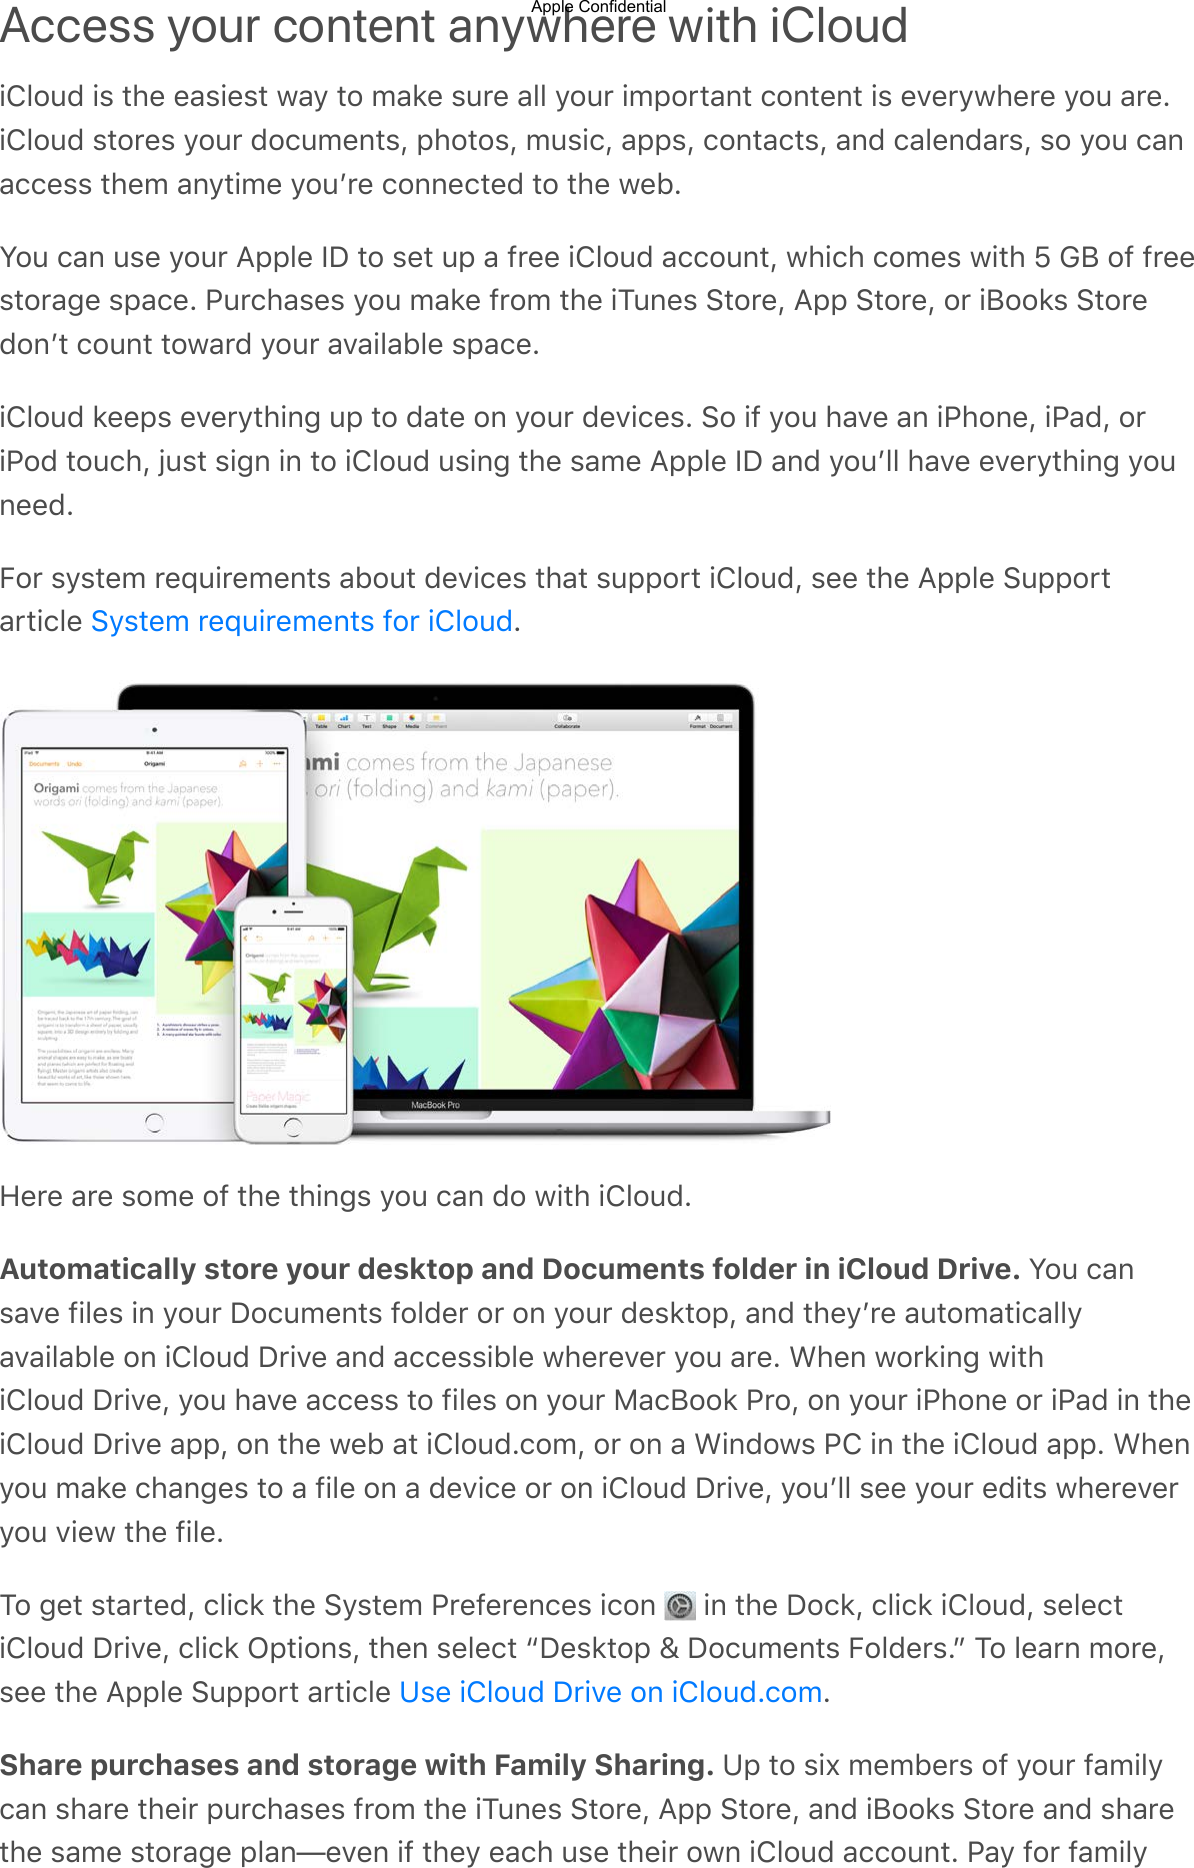 Access your content anywhere with iCloud,M5&quot;02$,9$-.3$3&amp;9,39-$+&amp;@$-&quot;$B&amp;)3$90#3$&amp;55$@&quot;0#$,B=&quot;#-&amp;1-$&apos;&quot;1-31-$,9$3;3#@+.3#3$@&quot;0$&amp;#3C,M5&quot;02$9-&quot;#39$@&quot;0#$2&quot;&apos;0B31-9A$=.&quot;-&quot;9A$B09,&apos;A$&amp;==9A$&apos;&quot;1-&amp;&apos;-9A$&amp;12$&apos;&amp;5312&amp;#9A$9&quot;$@&quot;0$&apos;&amp;1&amp;&apos;&apos;399$-.3B$&amp;1@-,B3$@&quot;0L#3$&apos;&quot;113&apos;-32$-&quot;$-.3$+34CZ&quot;0$&apos;&amp;1$093$@&quot;0#$&lt;==53$JK$-&quot;$93-$0=$&amp;$!#33$,M5&quot;02$&amp;&apos;&apos;&quot;01-A$+.,&apos;.$&apos;&quot;B39$+,-.$`$8($&quot;!$!#339-&quot;#&amp;73$9=&amp;&apos;3C$*0#&apos;.&amp;939$@&quot;0$B&amp;)3$!#&quot;B$-.3$,/0139$?-&quot;#3A$&lt;==$?-&quot;#3A$&quot;#$,(&quot;&quot;)9$?-&quot;#32&quot;1L-$&apos;&quot;01-$-&quot;+&amp;#2$@&quot;0#$&amp;;&amp;,5&amp;453$9=&amp;&apos;3C,M5&quot;02$)33=9$3;3#@-.,17$0=$-&quot;$2&amp;-3$&quot;1$@&quot;0#$23;,&apos;39C$?&quot;$,!$@&quot;0$.&amp;;3$&amp;1$,*.&quot;13A$,*&amp;2A$&quot;#,*&quot;2$-&quot;0&apos;.A$N09-$9,71$,1$-&quot;$,M5&quot;02$09,17$-.3$9&amp;B3$&lt;==53$JK$&amp;12$@&quot;0L55$.&amp;;3$3;3#@-.,17$@&quot;01332C&gt;&quot;#$9@9-3B$#3E0,#3B31-9$&amp;4&quot;0-$23;,&apos;39$-.&amp;-$90==&quot;#-$,M5&quot;02A$933$-.3$&lt;==53$?0==&quot;#-&amp;#-,&apos;53$ CP3#3$&amp;#3$9&quot;B3$&quot;!$-.3$-.,179$@&quot;0$&apos;&amp;1$2&quot;$+,-.$,M5&quot;02CAutomatically store your desktop and Documents folder in iCloud Drive. Z&quot;0$&apos;&amp;19&amp;;3$!,539$,1$@&quot;0#$K&quot;&apos;0B31-9$!&quot;523#$&quot;#$&quot;1$@&quot;0#$239)-&quot;=A$&amp;12$-.3@L#3$&amp;0-&quot;B&amp;-,&apos;&amp;55@&amp;;&amp;,5&amp;453$&quot;1$,M5&quot;02$K#,;3$&amp;12$&amp;&apos;&apos;399,453$+.3#3;3#$@&quot;0$&amp;#3C$D.31$+&quot;#),17$+,-.,M5&quot;02$K#,;3A$@&quot;0$.&amp;;3$&amp;&apos;&apos;399$-&quot;$!,539$&quot;1$@&quot;0#$%&amp;&apos;(&quot;&quot;)$*#&quot;A$&quot;1$@&quot;0#$,*.&quot;13$&quot;#$,*&amp;2$,1$-.3,M5&quot;02$K#,;3$&amp;==A$&quot;1$-.3$+34$&amp;-$,M5&quot;02C&apos;&quot;BA$&quot;#$&quot;1$&amp;$D,12&quot;+9$*M$,1$-.3$,M5&quot;02$&amp;==C$D.31@&quot;0$B&amp;)3$&apos;.&amp;1739$-&quot;$&amp;$!,53$&quot;1$&amp;$23;,&apos;3$&quot;#$&quot;1$,M5&quot;02$K#,;3A$@&quot;0L55$933$@&quot;0#$32,-9$+.3#3;3#@&quot;0$;,3+$-.3$!,53C/&quot;$73-$9-&amp;#-32A$&apos;5,&apos;)$-.3$?@9-3B$*#3!3#31&apos;39$,&apos;&quot;1$ $,1$-.3$K&quot;&apos;)A$&apos;5,&apos;)$,M5&quot;02A$9353&apos;-,M5&quot;02$K#,;3A$&apos;5,&apos;)$O=-,&quot;19A$-.31$9353&apos;-$eK39)-&quot;=$g$K&quot;&apos;0B31-9$&gt;&quot;523#9Cf$/&quot;$53&amp;#1$B&quot;#3A933$-.3$&lt;==53$?0==&quot;#-$&amp;#-,&apos;53$ CShare purchases and storage with Family Sharing. :=$-&quot;$9,I$B3B43#9$&quot;!$@&quot;0#$!&amp;B,5@&apos;&amp;1$9.&amp;#3$-.3,#$=0#&apos;.&amp;939$!#&quot;B$-.3$,/0139$?-&quot;#3A$&lt;==$?-&quot;#3A$&amp;12$,(&quot;&quot;)9$?-&quot;#3$&amp;12$9.&amp;#3-.3$9&amp;B3$9-&quot;#&amp;73$=5&amp;1a3;31$,!$-.3@$3&amp;&apos;.$093$-.3,#$&quot;+1$,M5&quot;02$&amp;&apos;&apos;&quot;01-C$*&amp;@$!&quot;#$!&amp;B,5@?@9-3B$#3E0,#3B31-9$!&quot;#$,M5&quot;02:93$,M5&quot;02$K#,;3$&quot;1$,M5&quot;02C&apos;&quot;BApple Confidential